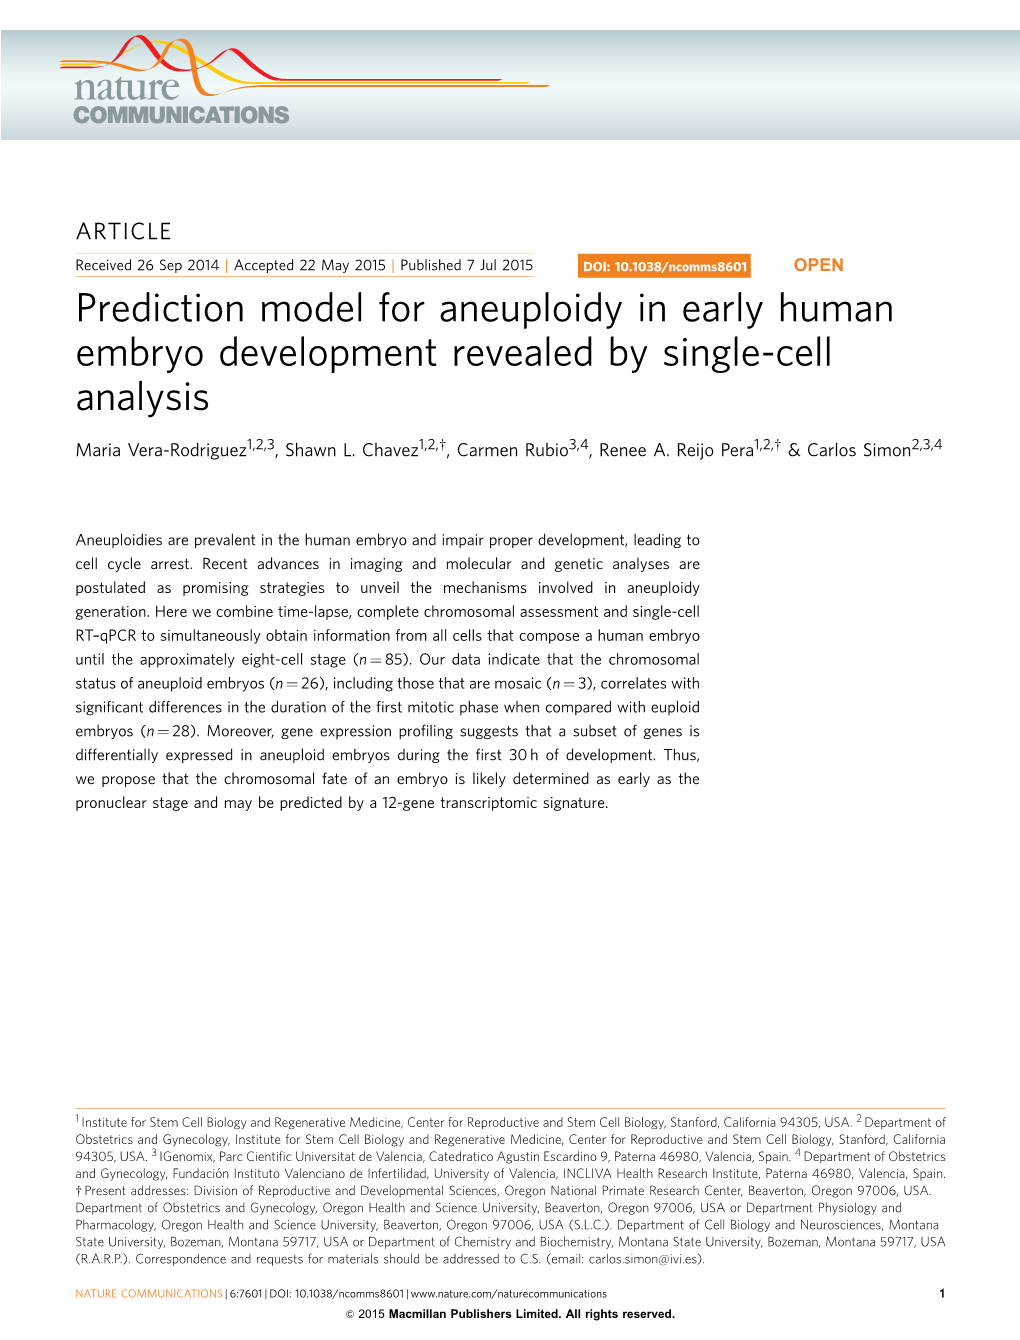 Prediction Model for Aneuploidy in Early Human Embryo Development Revealed by Single-Cell Analysis